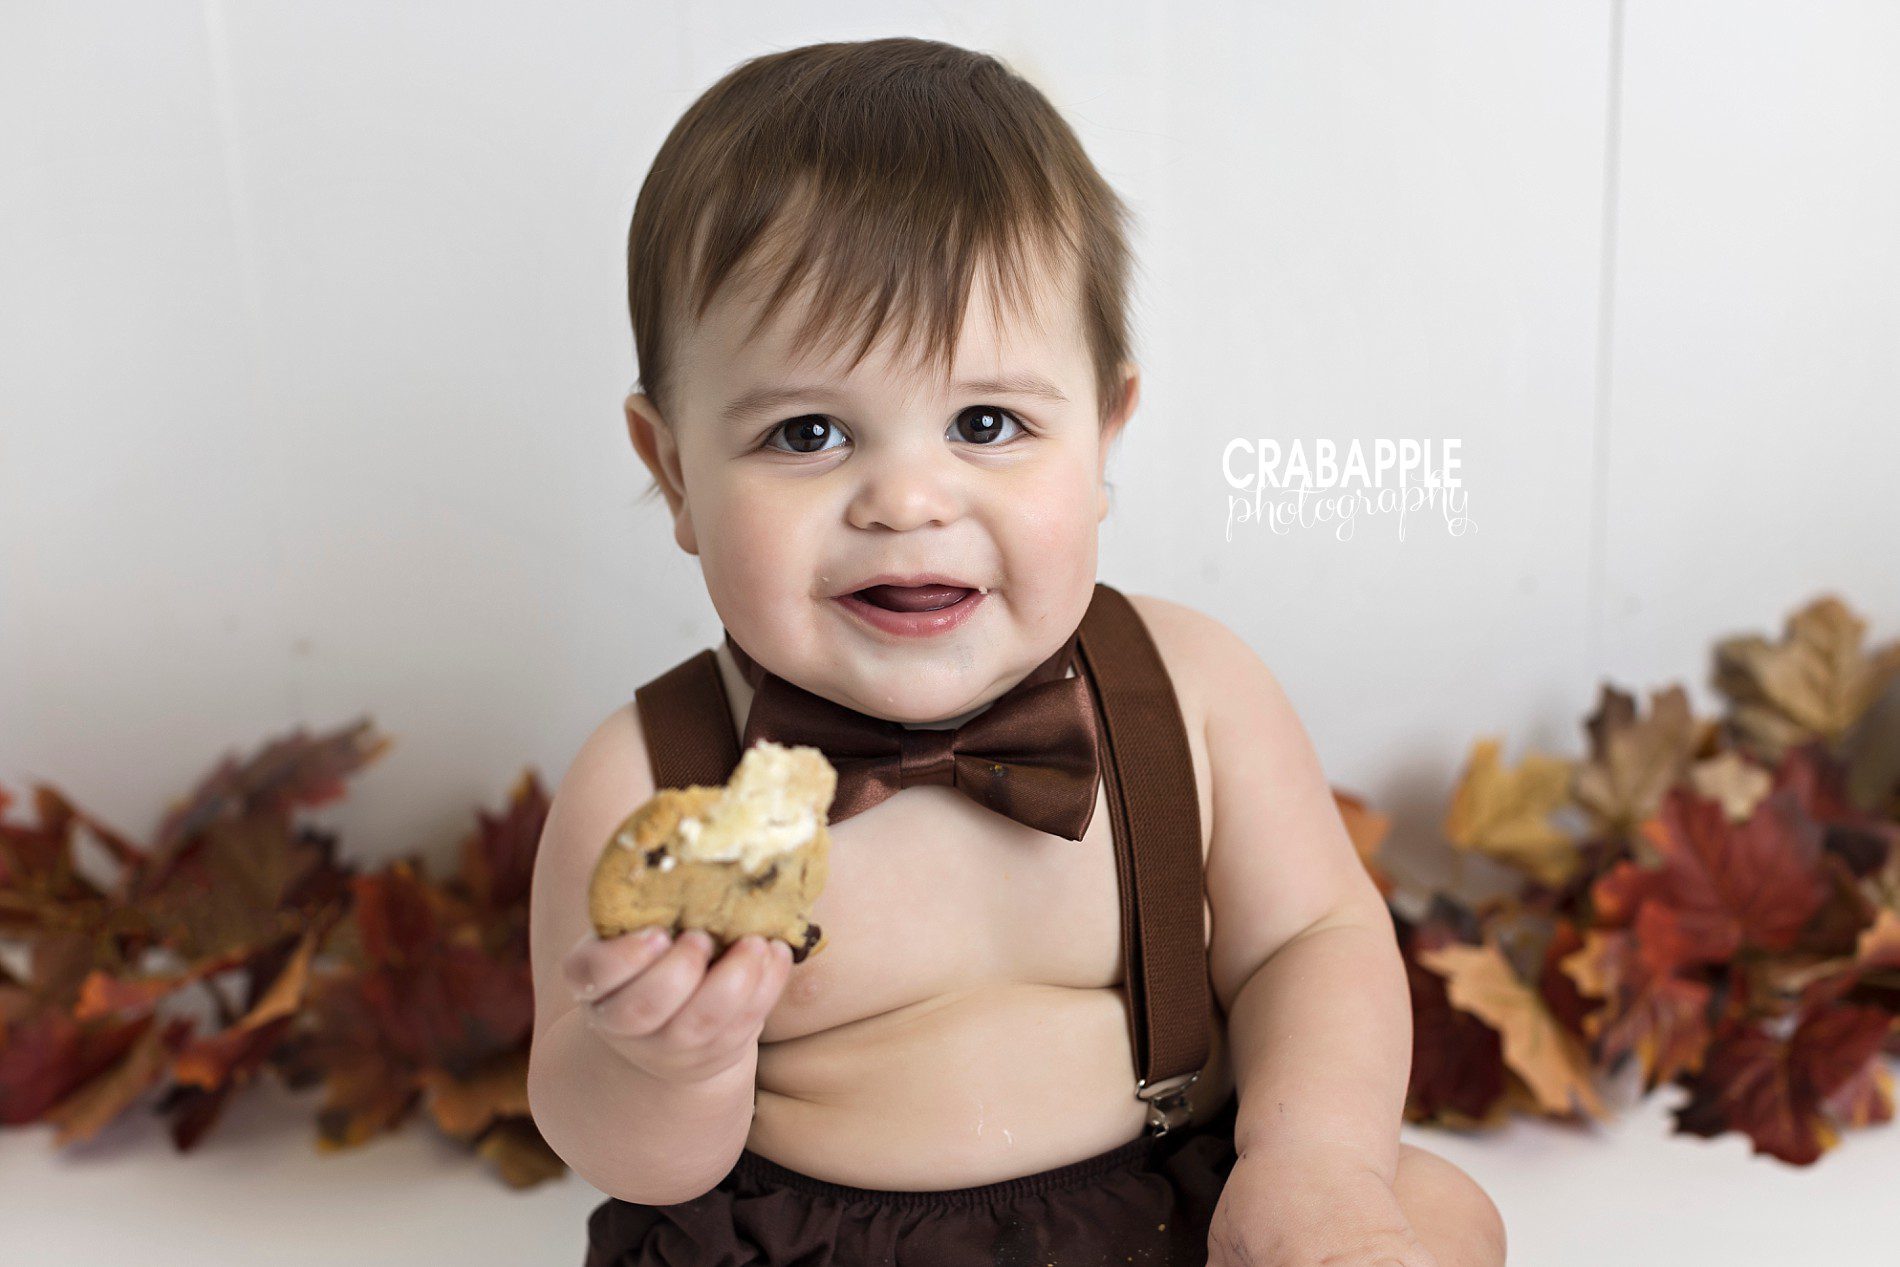 One year old portrait of a baby boy eating a cookie.